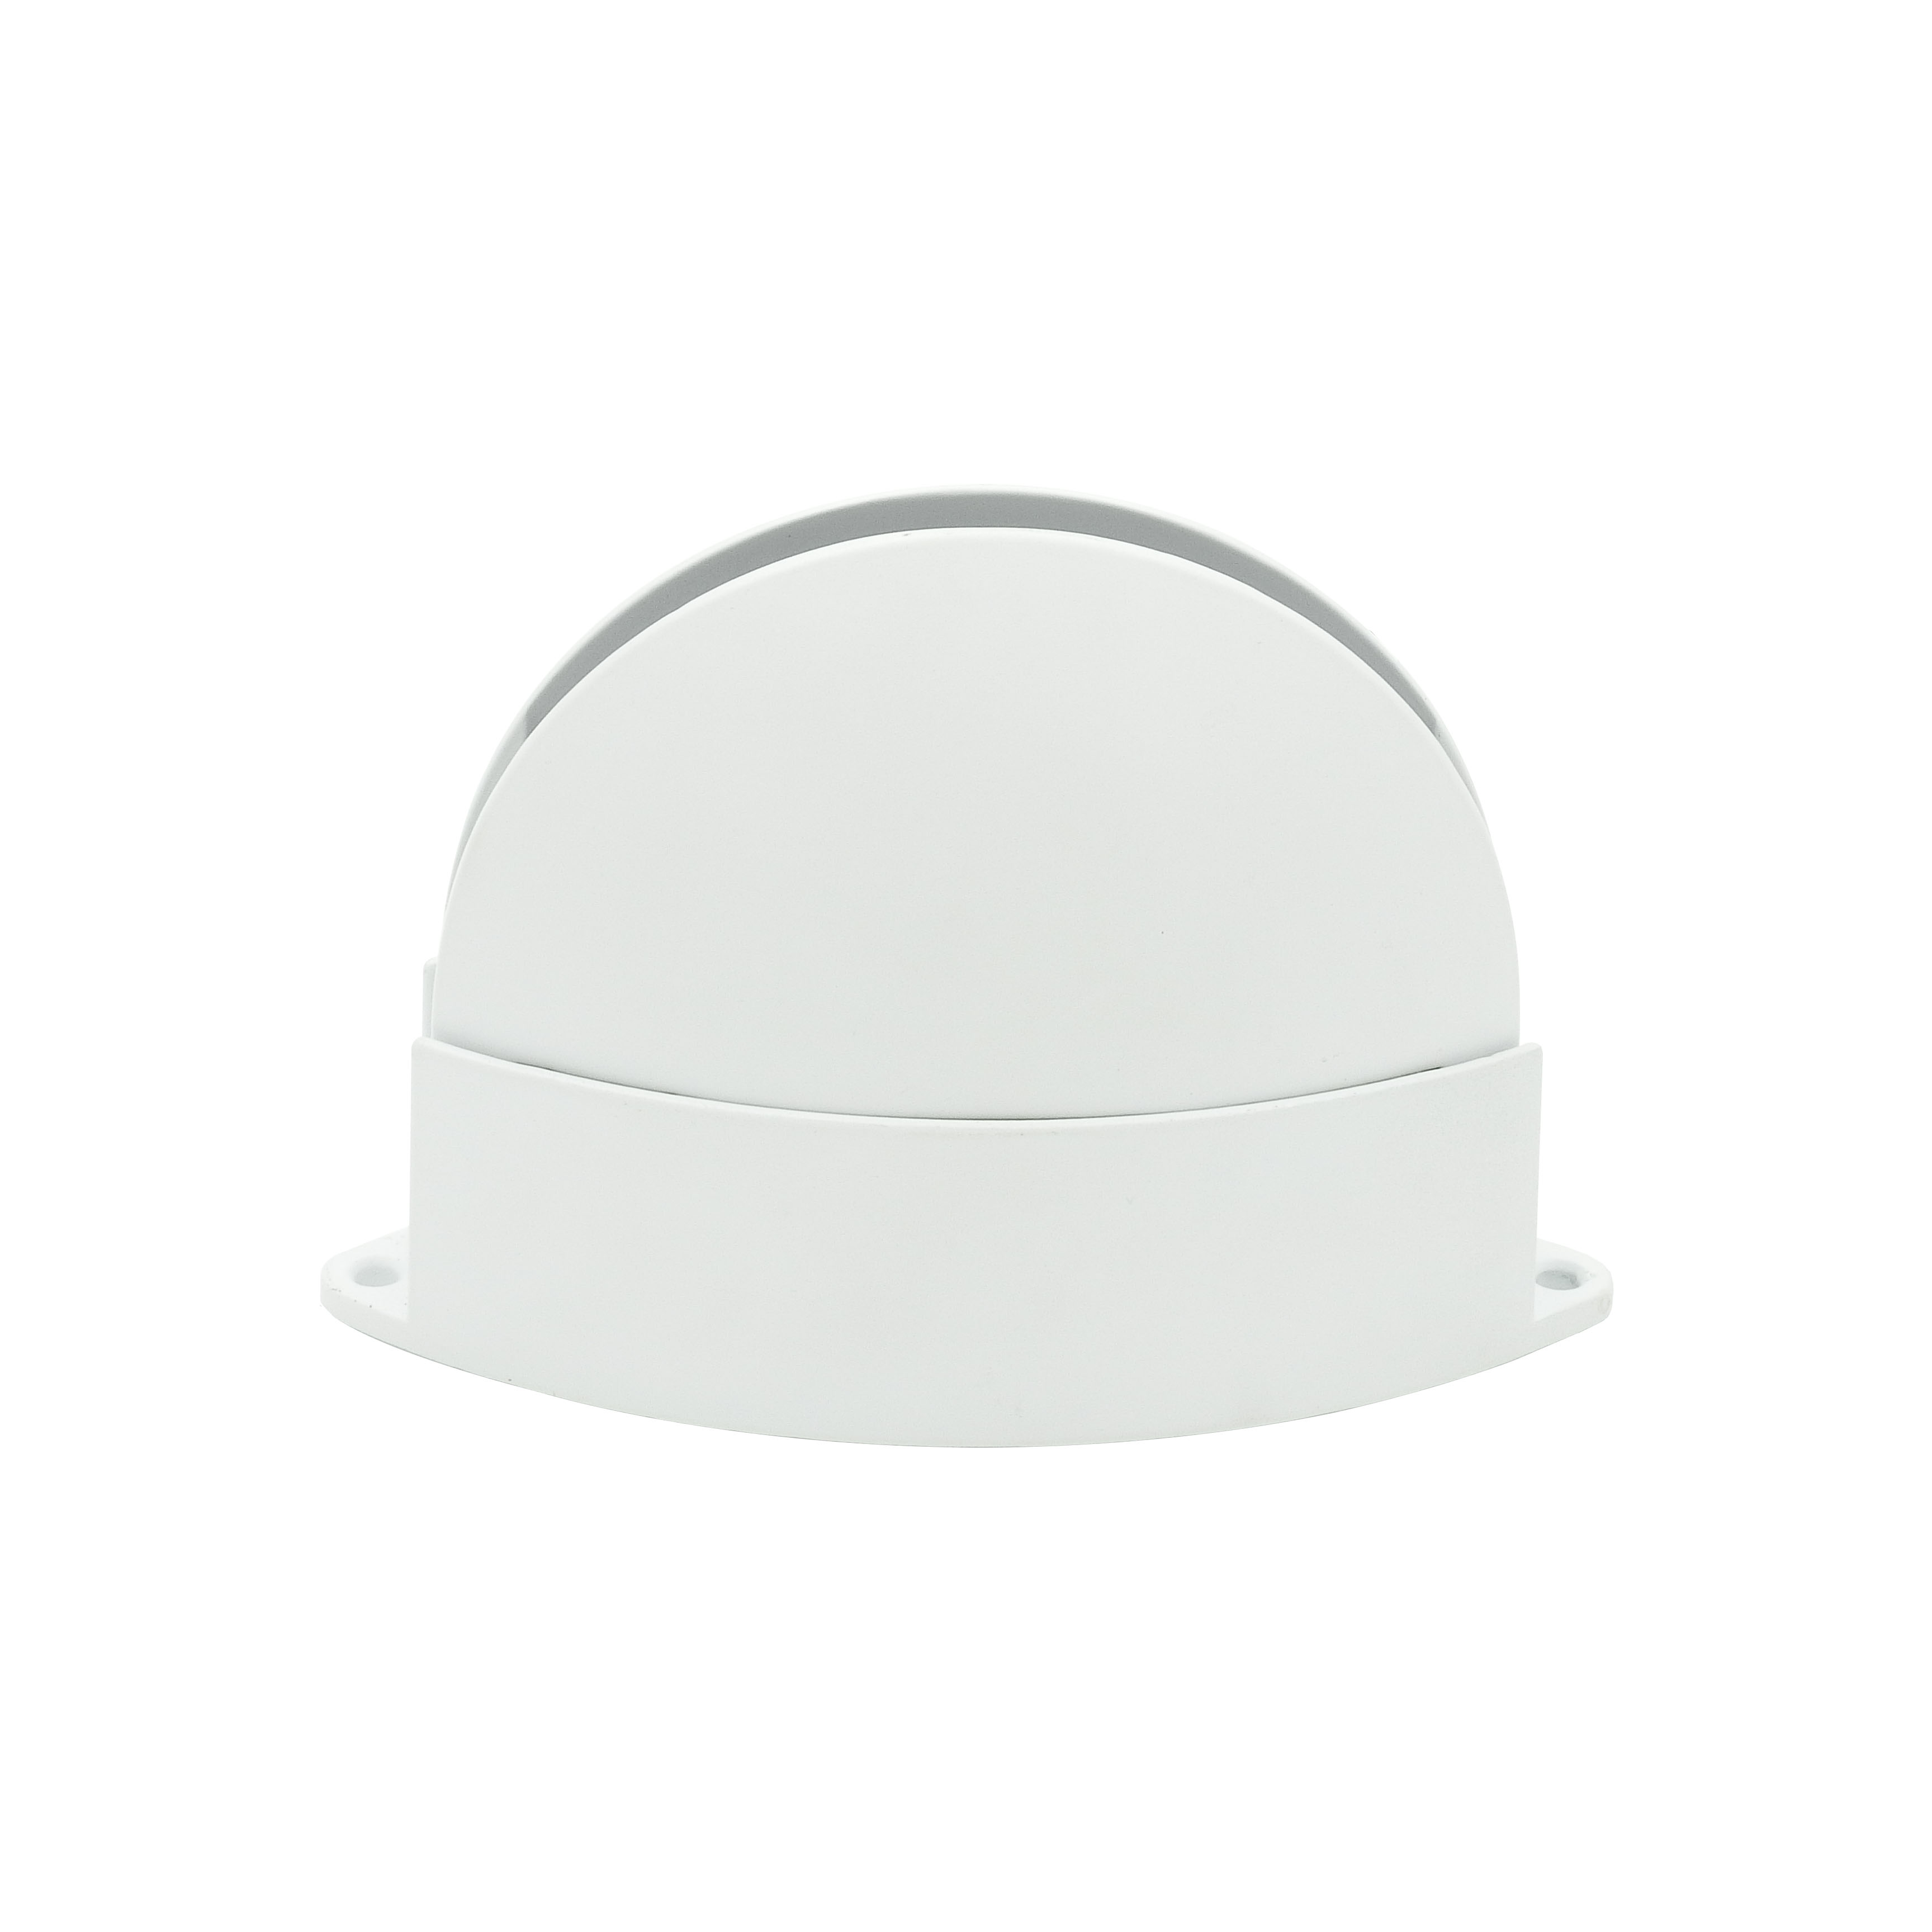 IB1706A,Outdoor series Ceiling Light